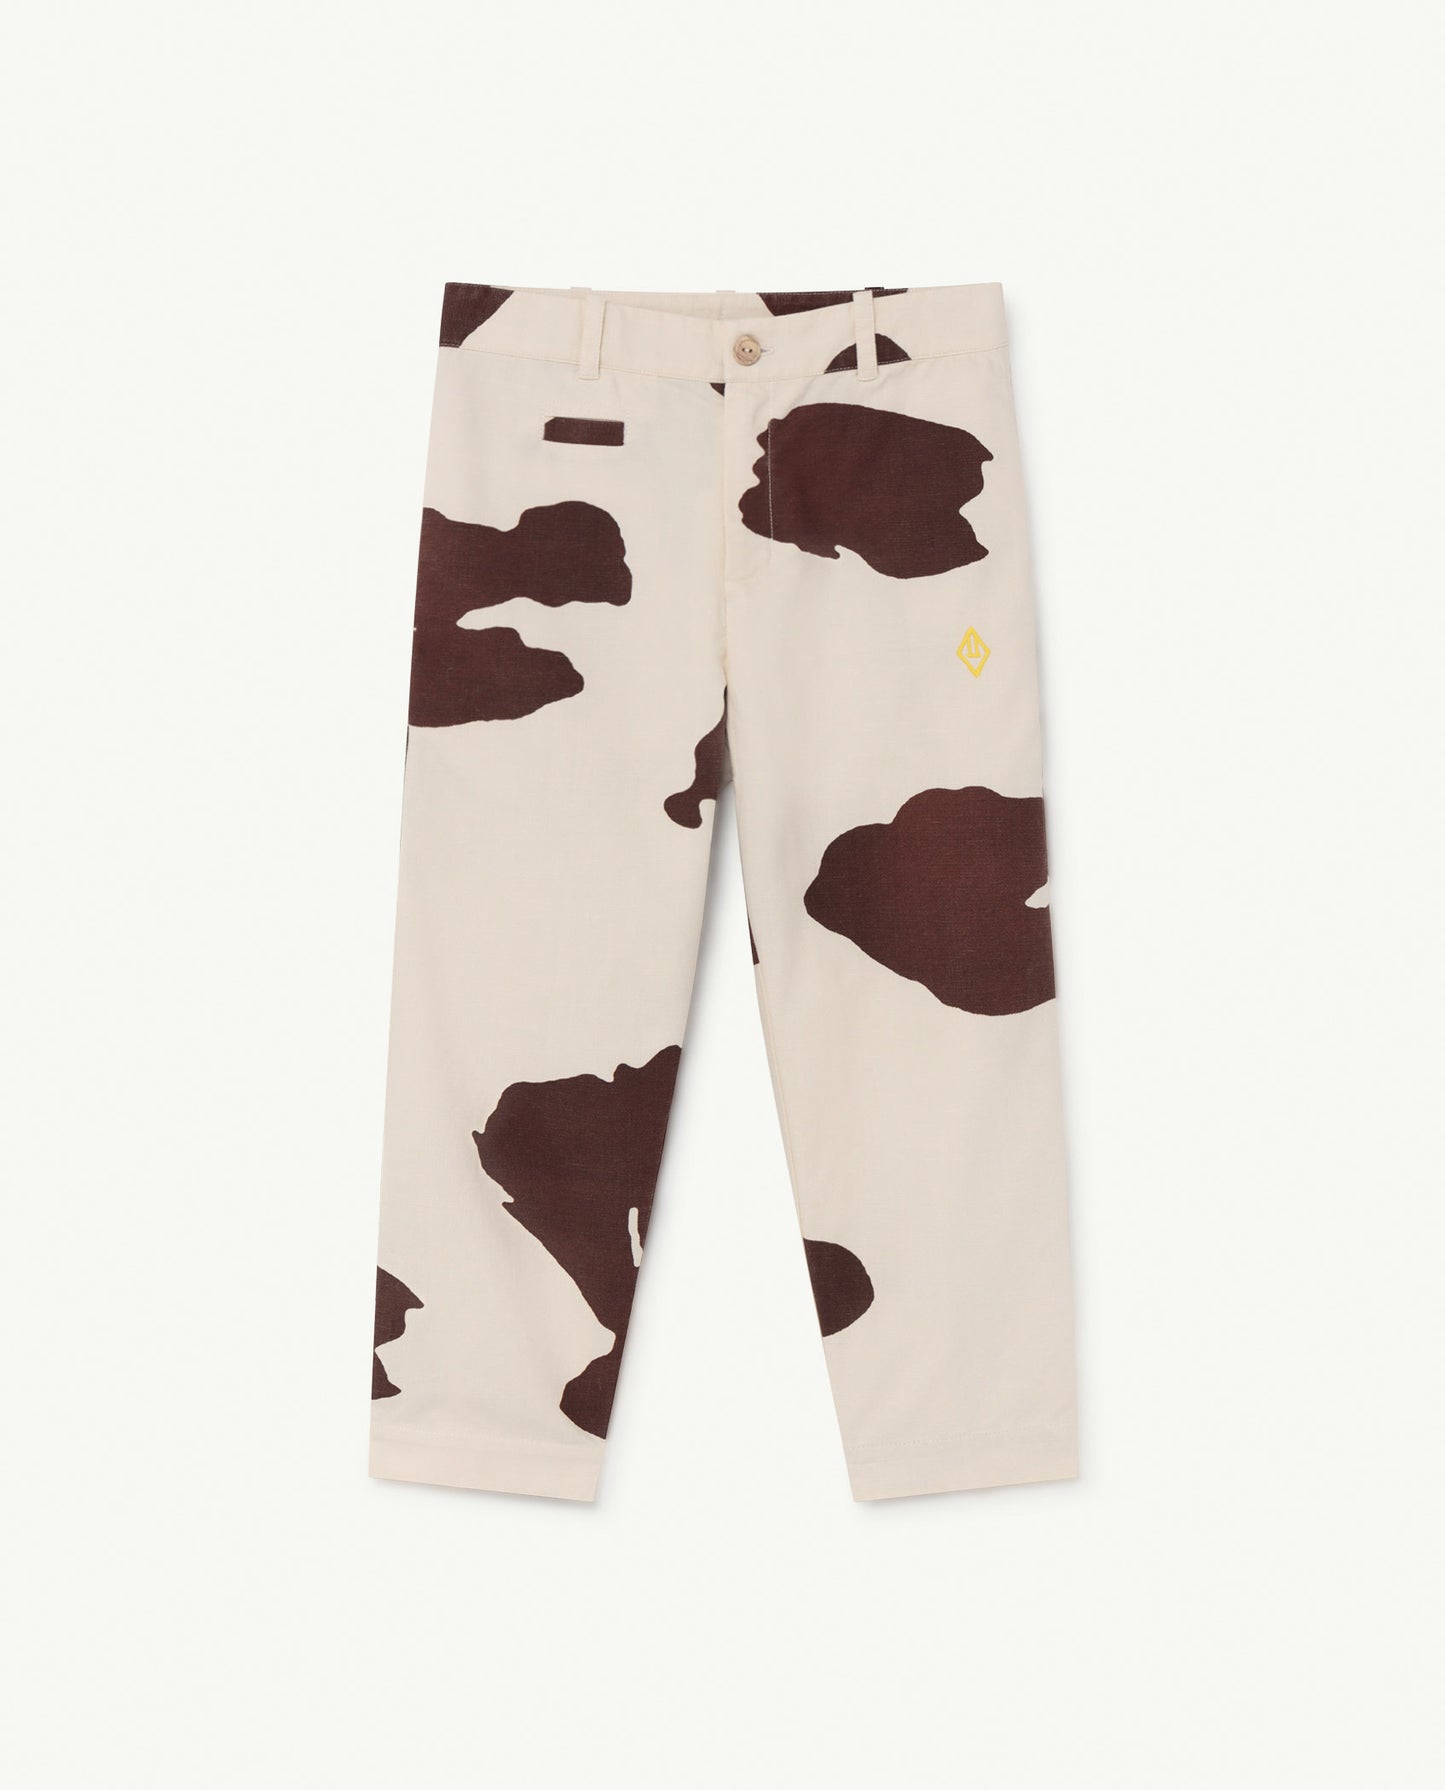 CAMEL KIDS TROUSER - WHITE COW || THE ANIMALS OBSERVATORY